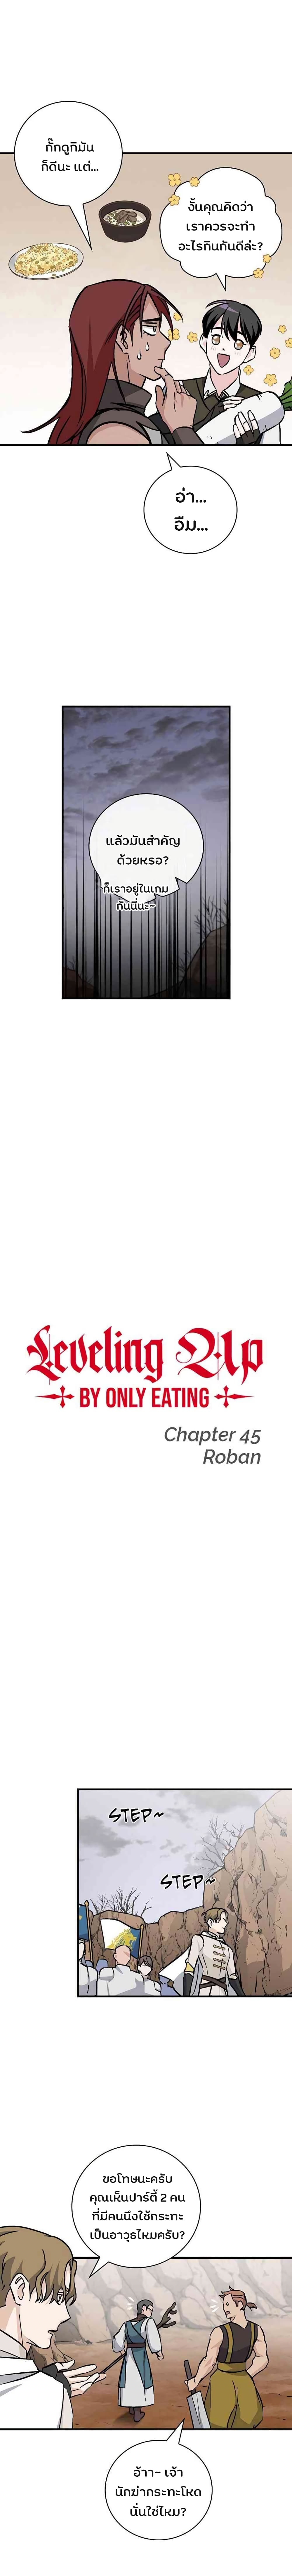 Leveling Up, By Only Eating! 45-45